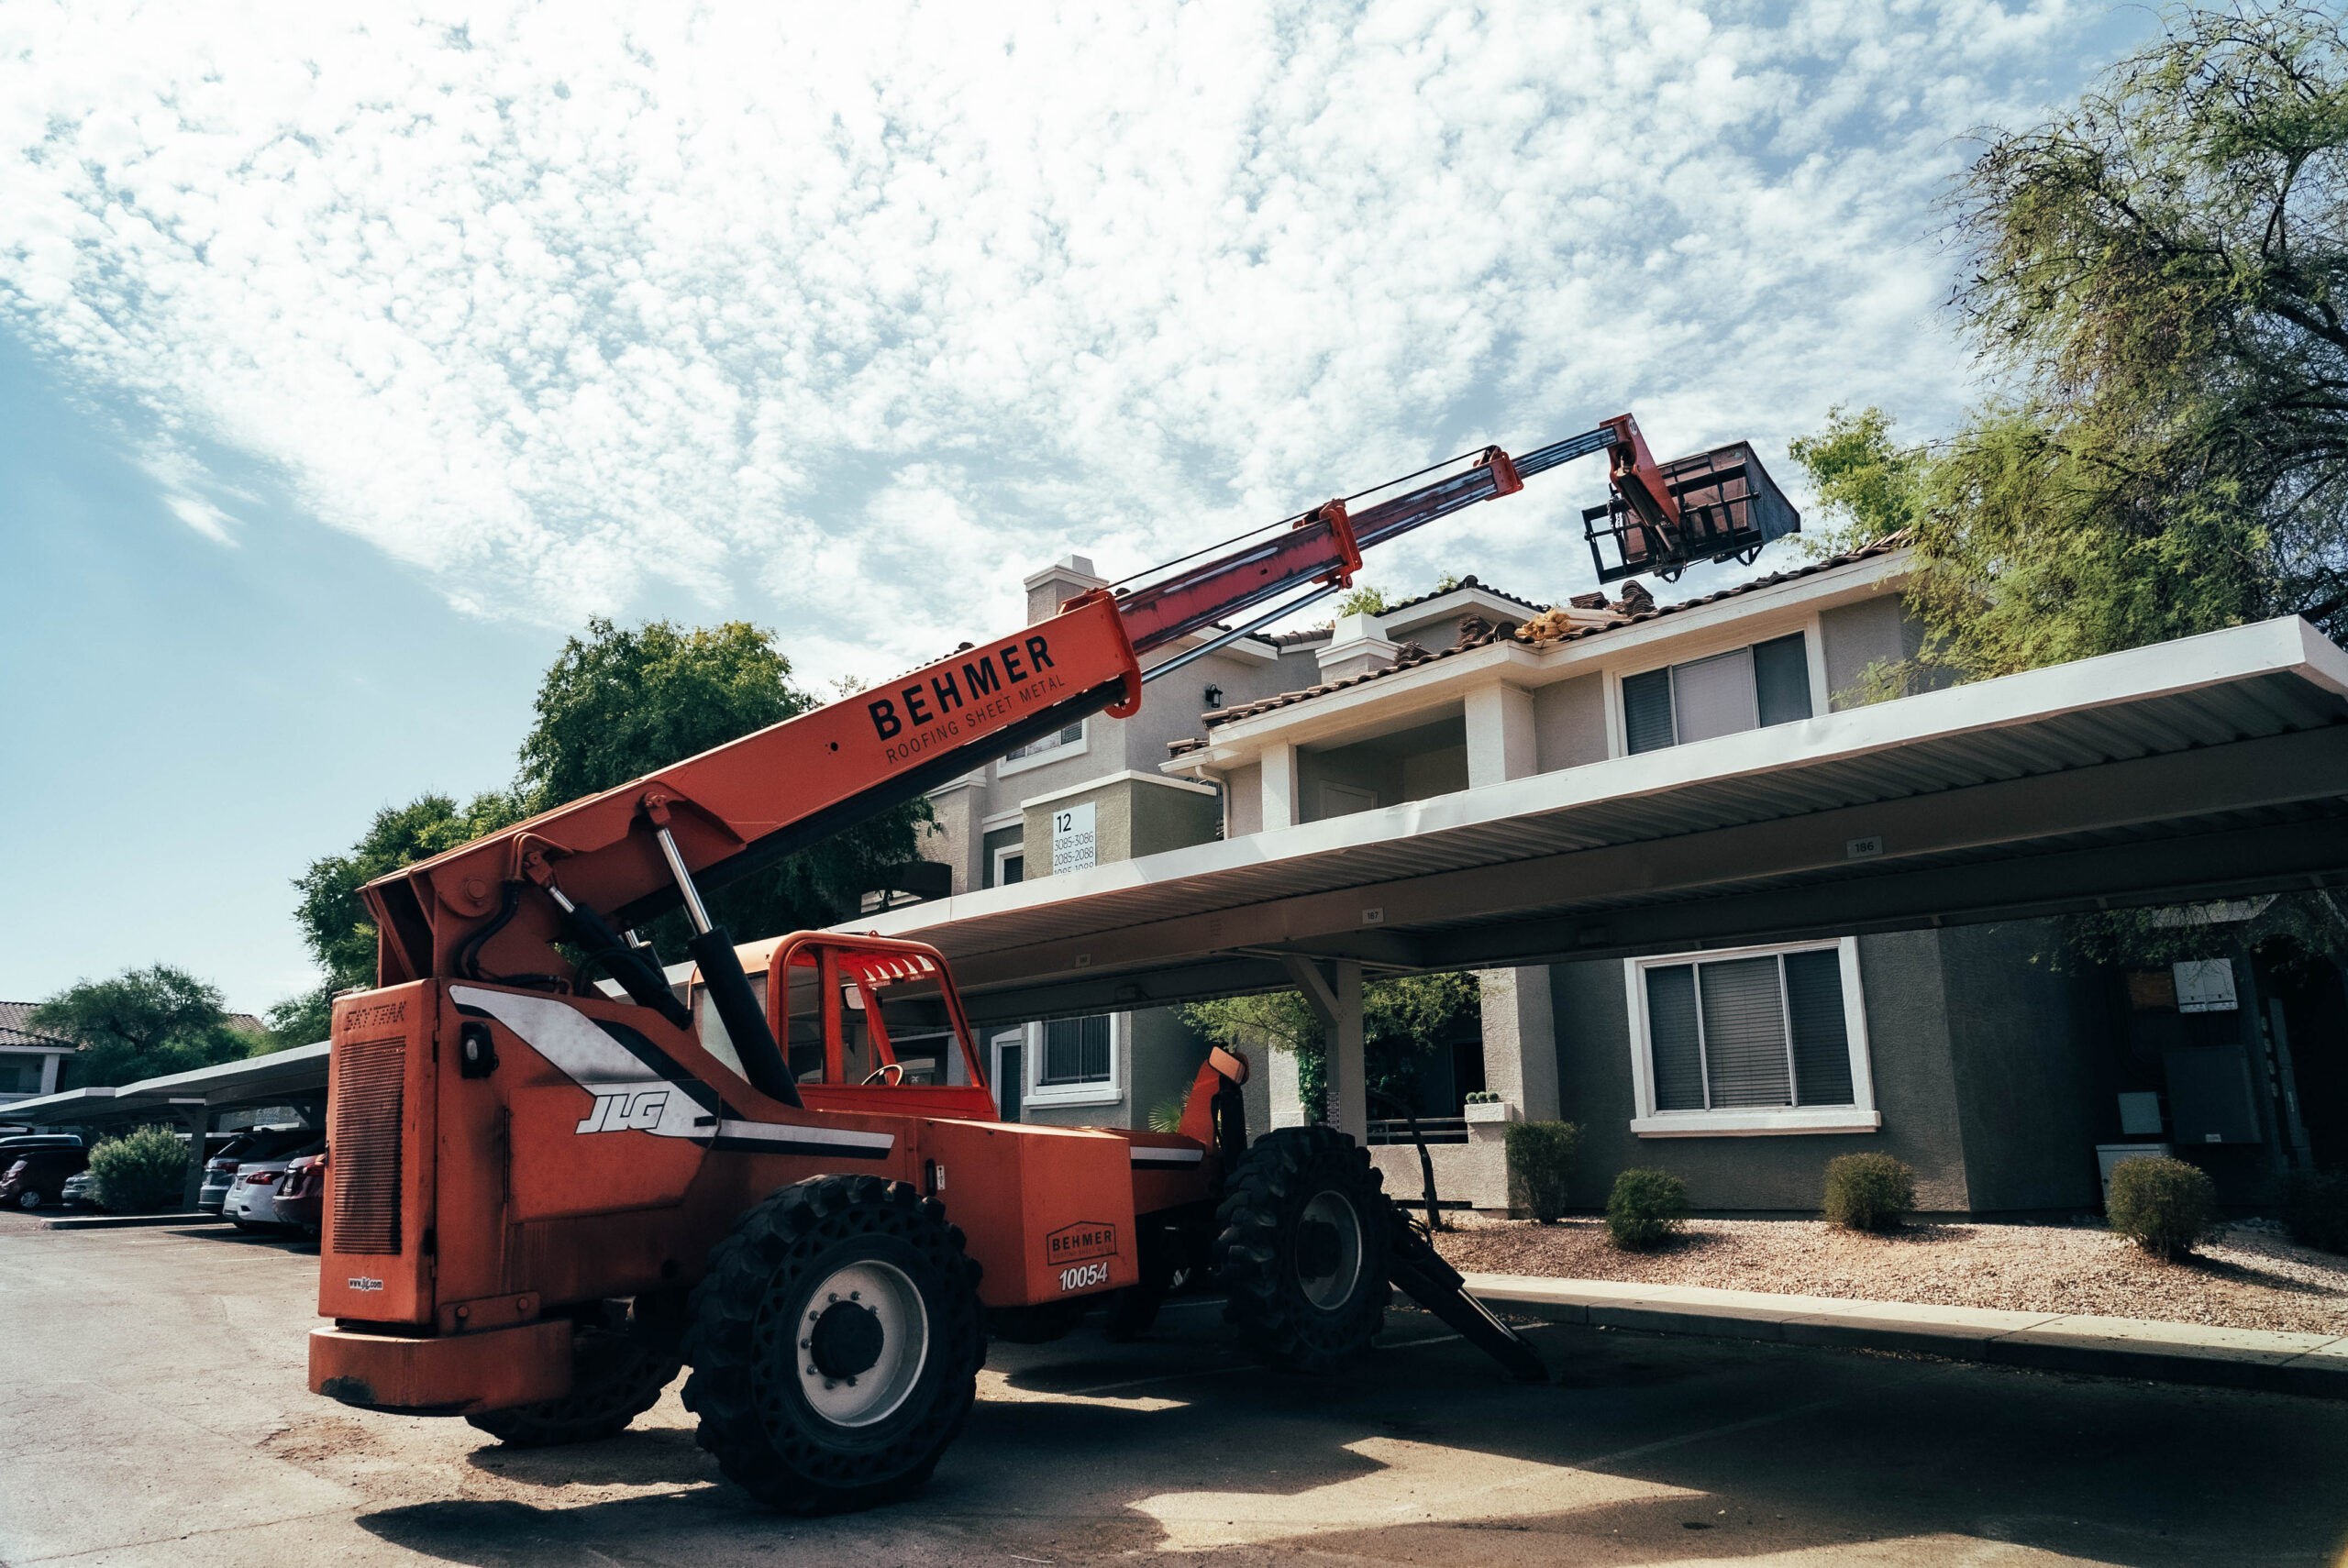 Crane positioned for roofing duties in front of a McCormick Ranch residential unit.